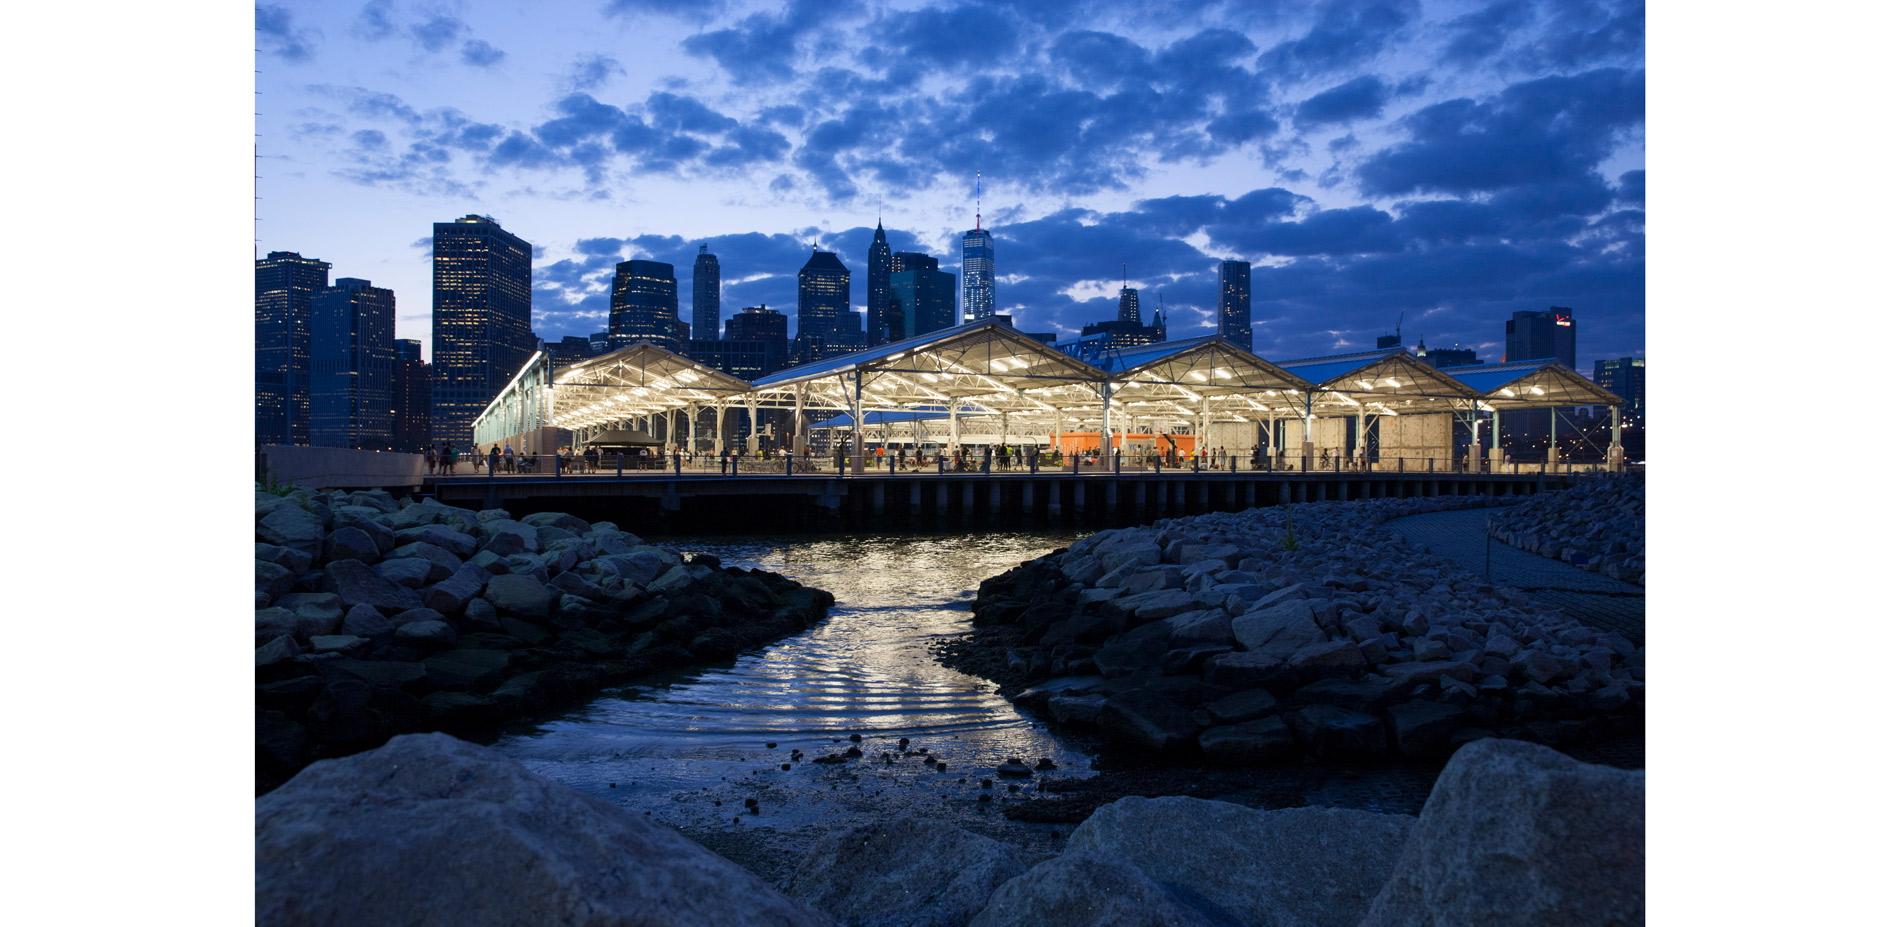 Night lighting at Pier 2 allows games to go on until 11:00pm. In the evening the pier is a vibrant social space and a beacon of urban life to compleme…